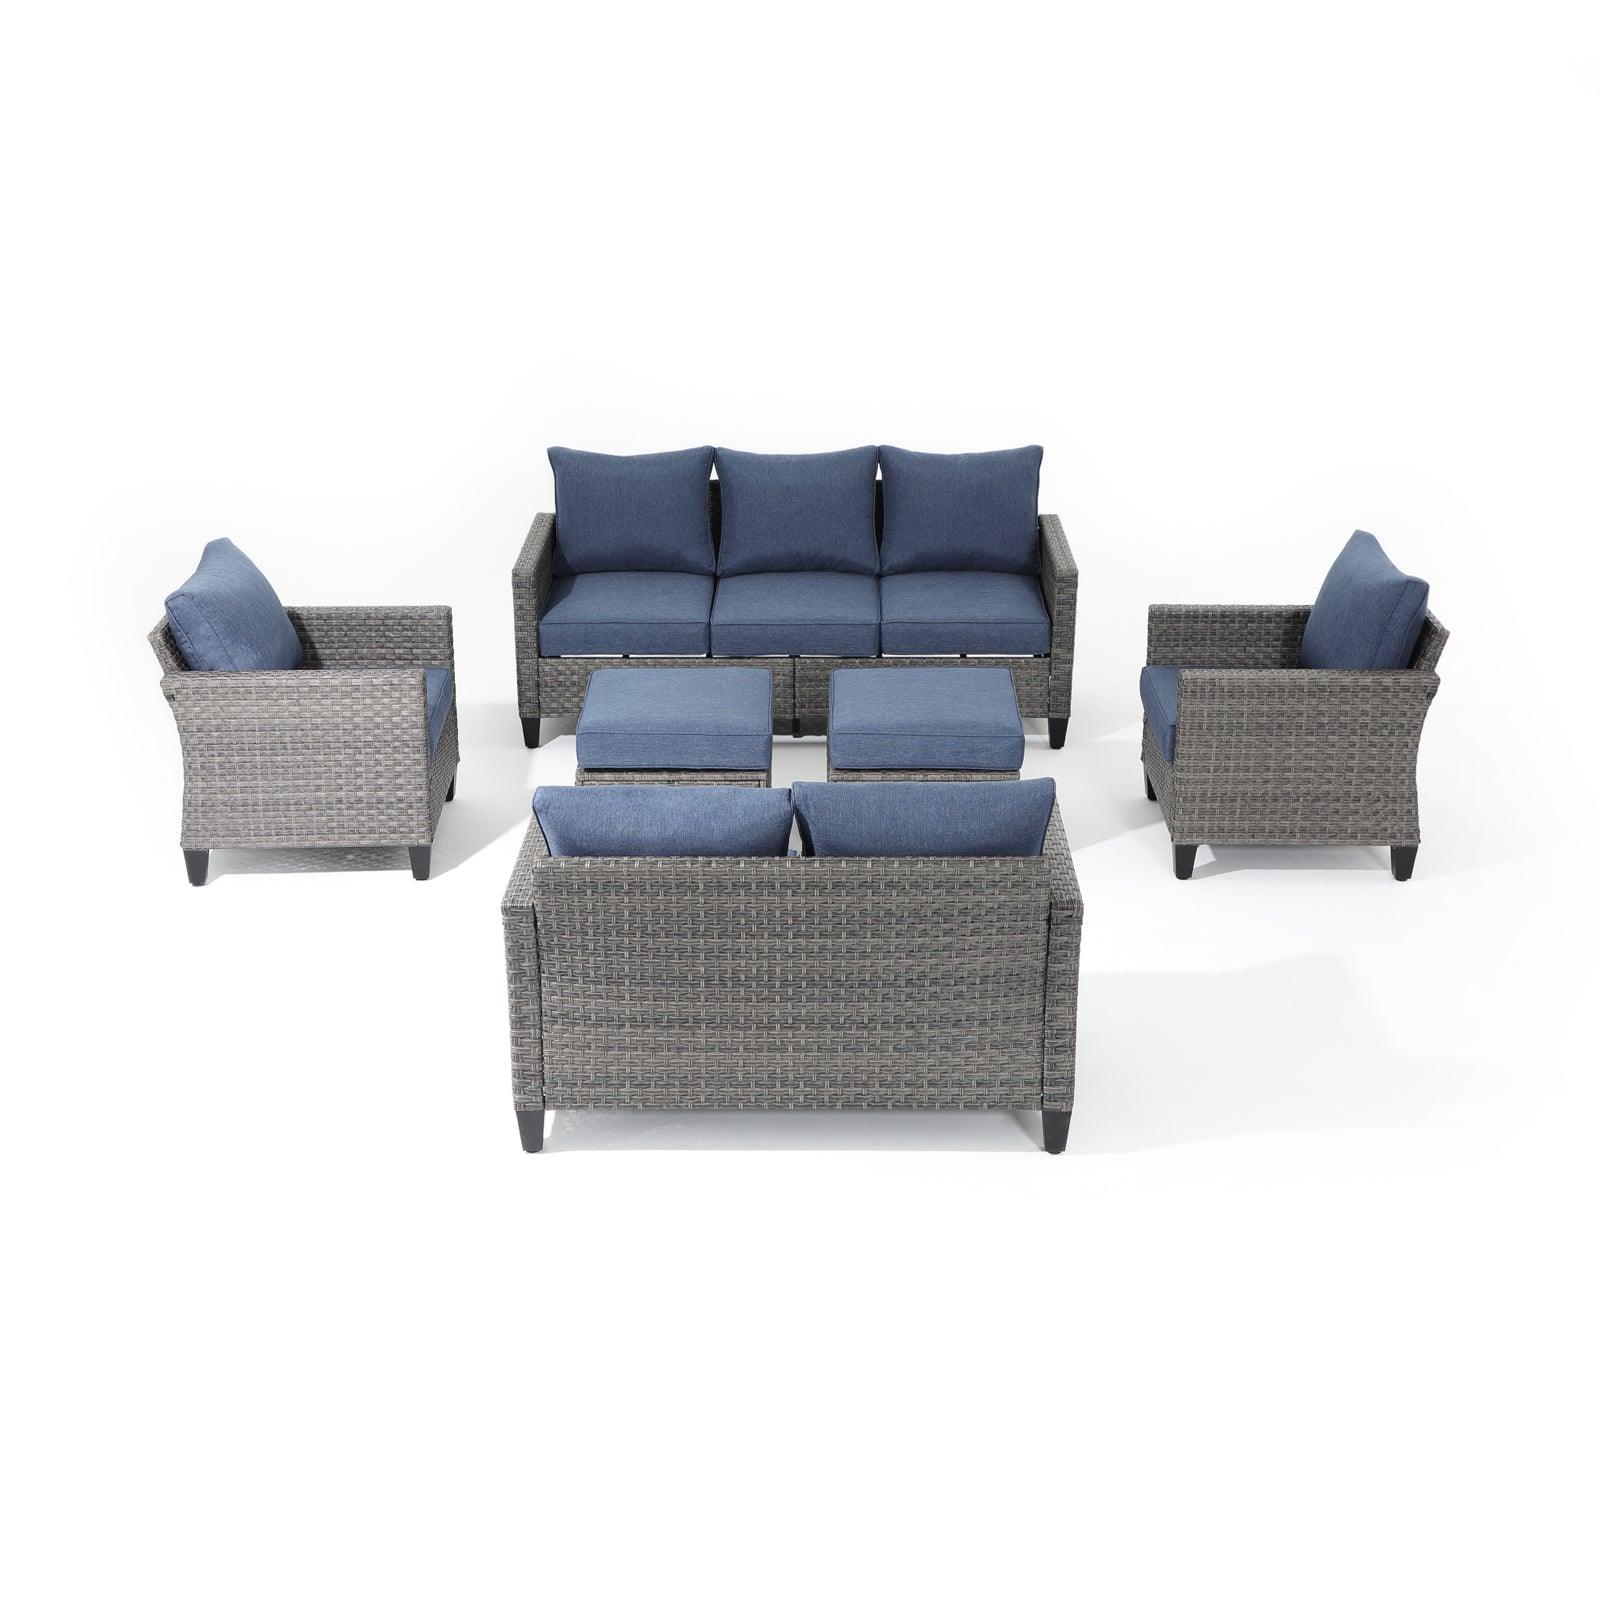 Ayia 6-Piece Grey outdoor Sofa Set with navu blue cushions, a 3-seater sofa, 2 arm chairs , 2 ottomans, 1 loveseat- Jardina Furniture #color_Navy blue#piece_6-pc. with ottomans